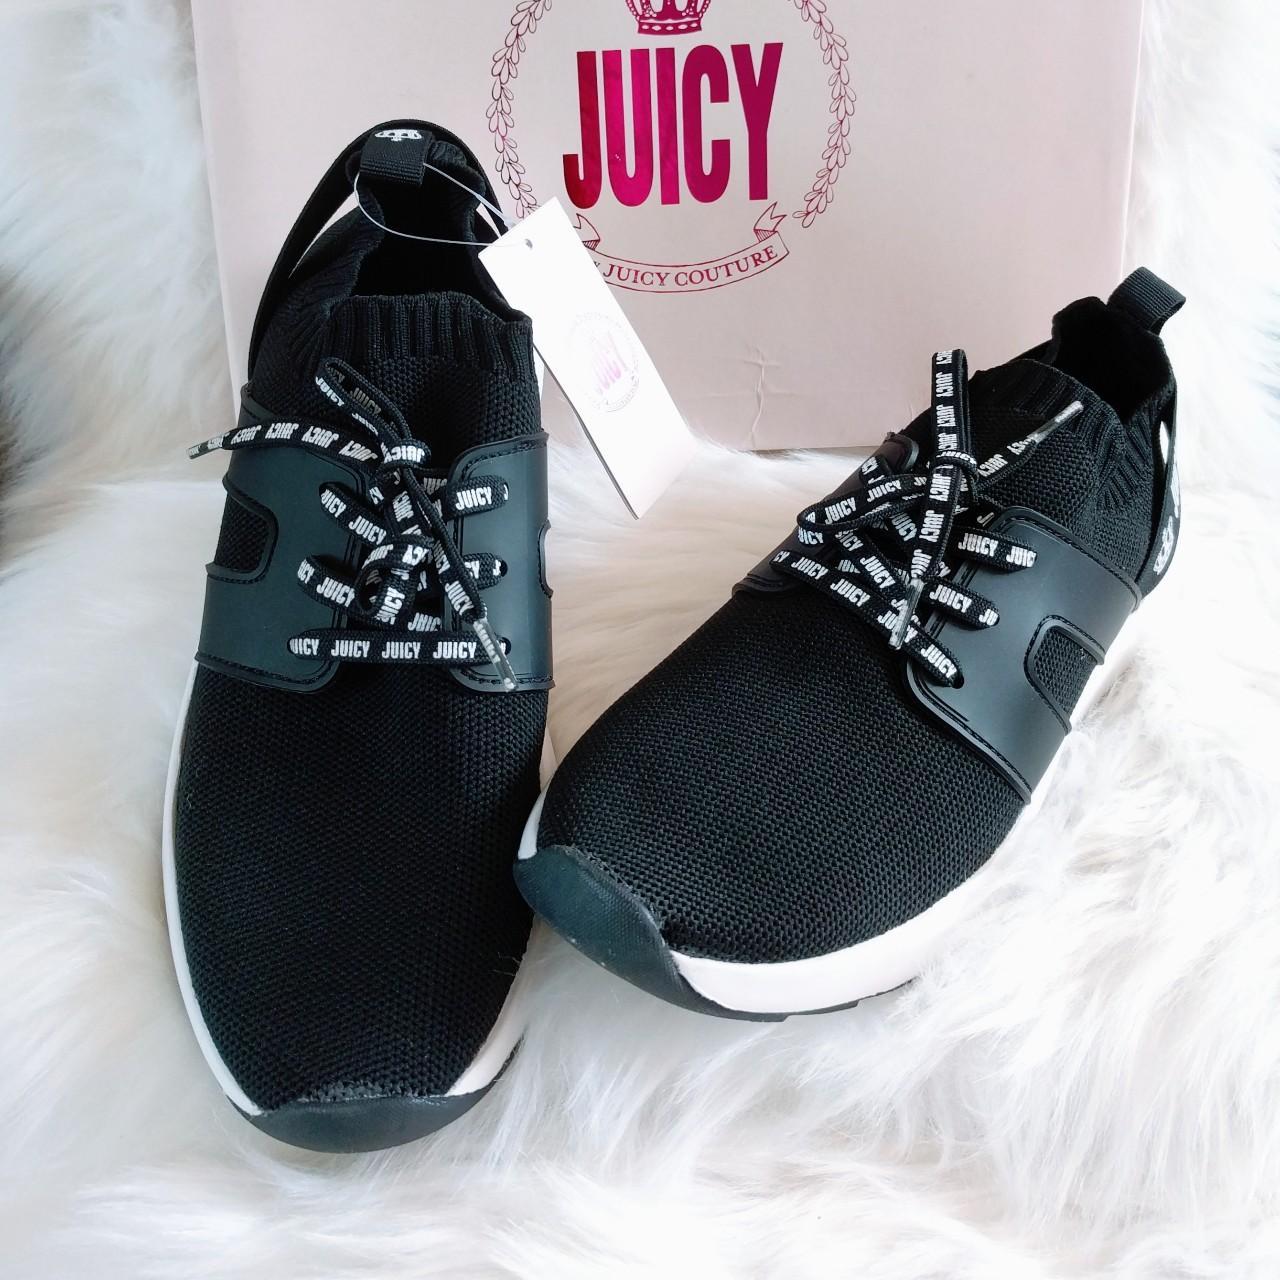 Juicy Couture Adorbs Lace Up... - Envy Shoes & Accessories | Facebook